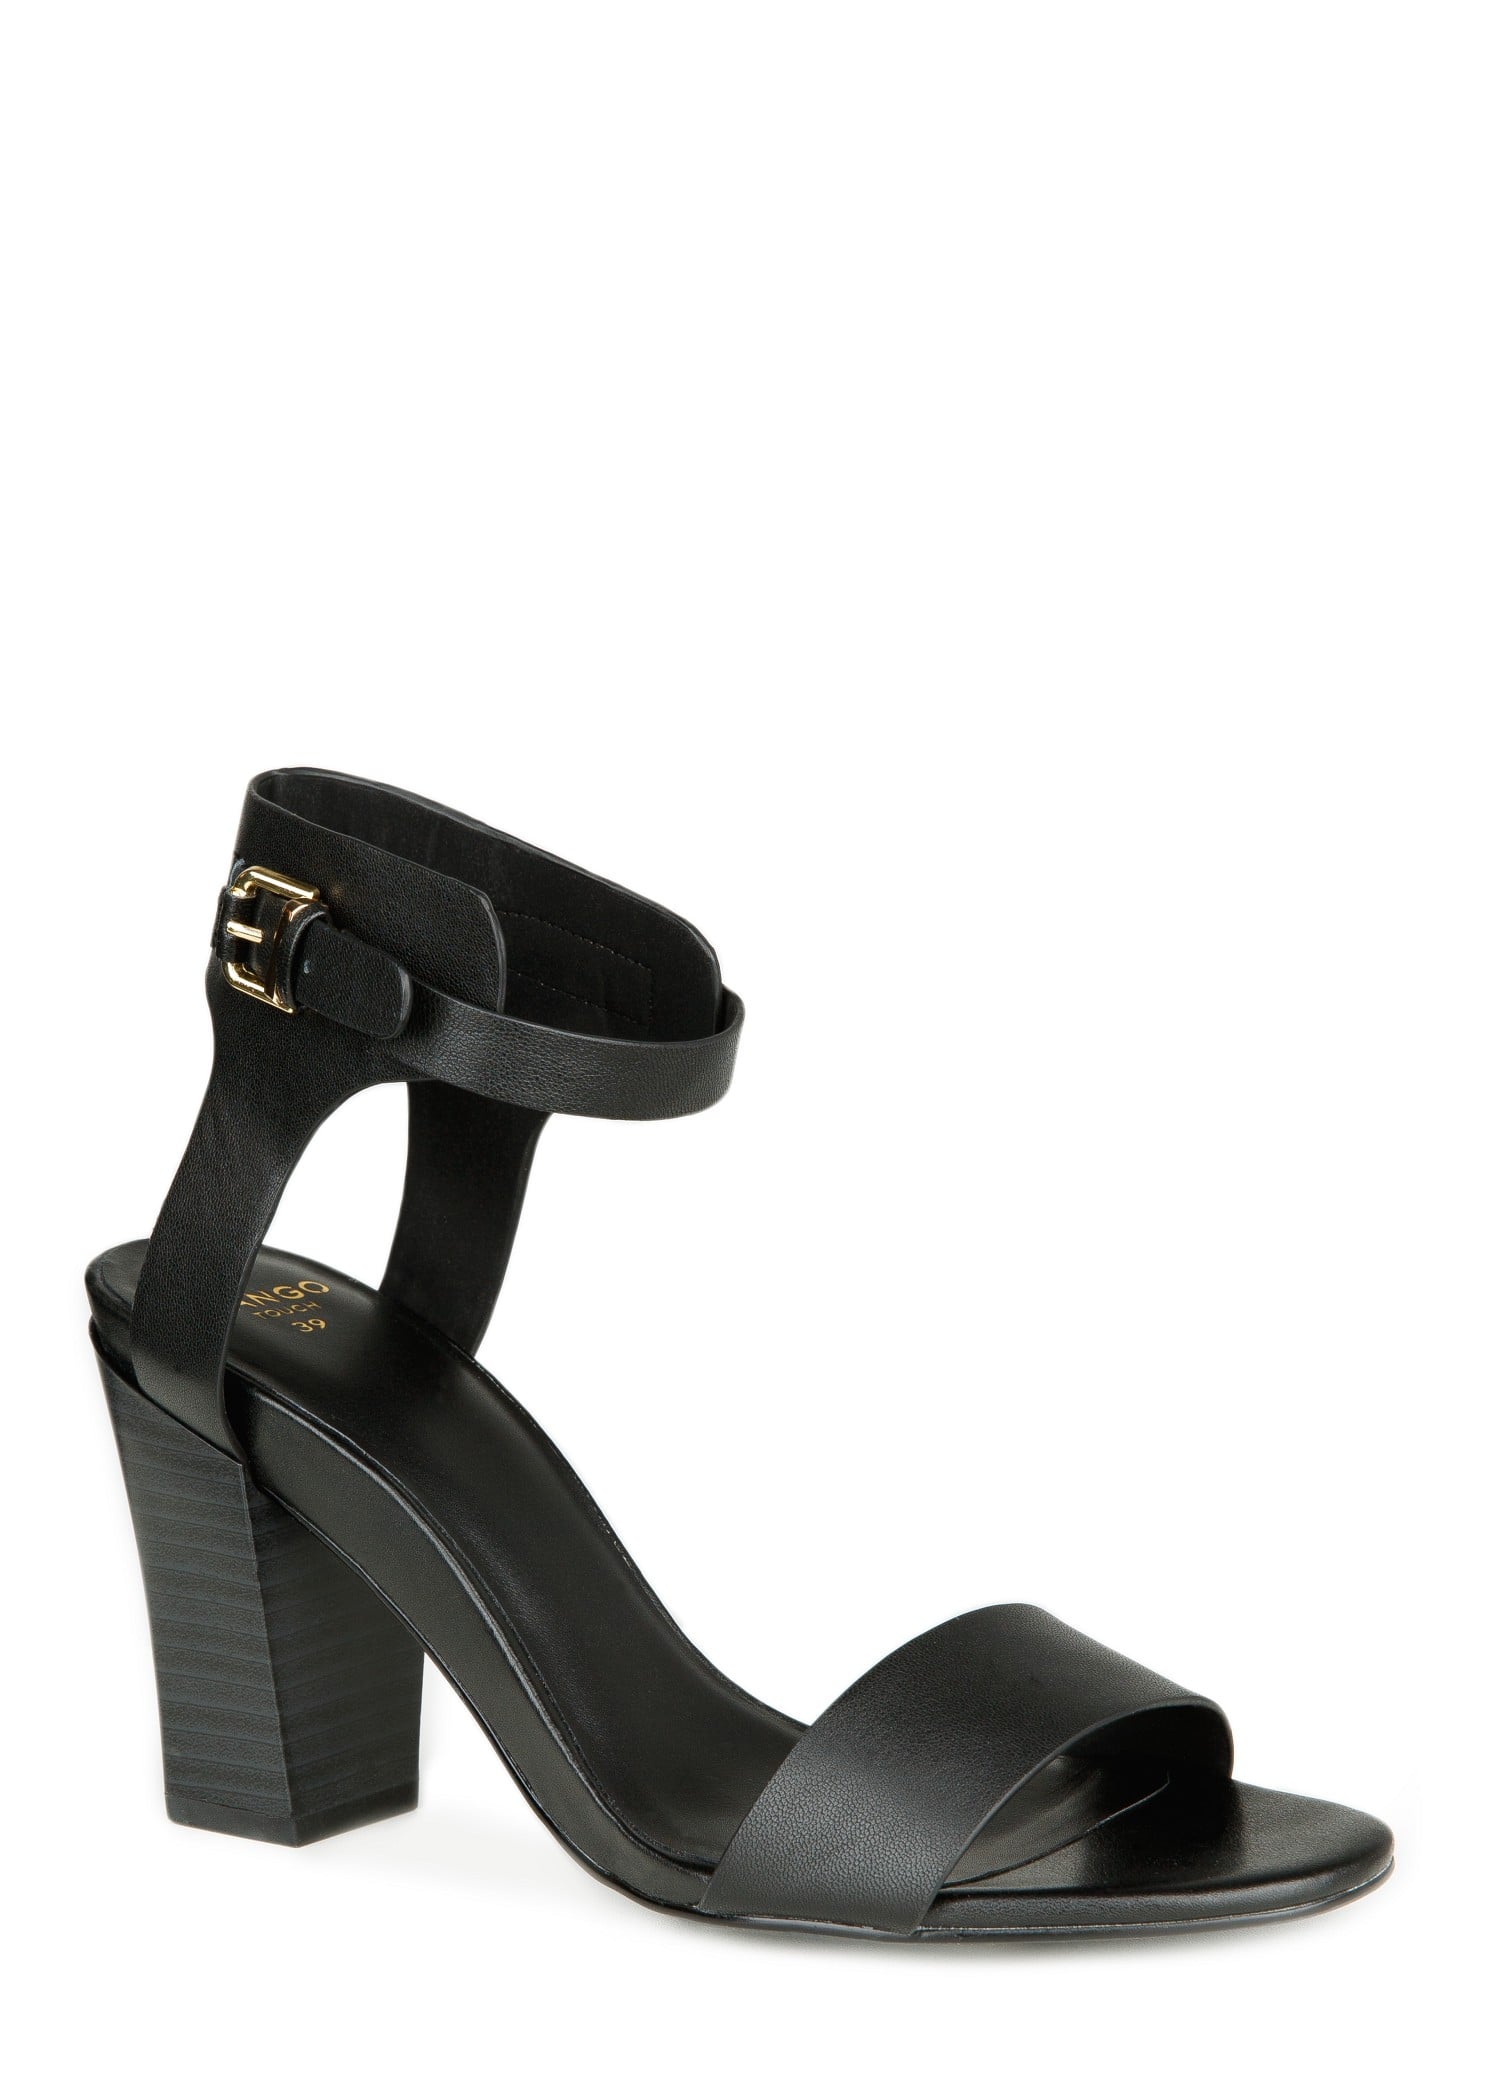 Mango Black Ankle-Strap Sandals | Surprise! You'll Want to Wear a ...